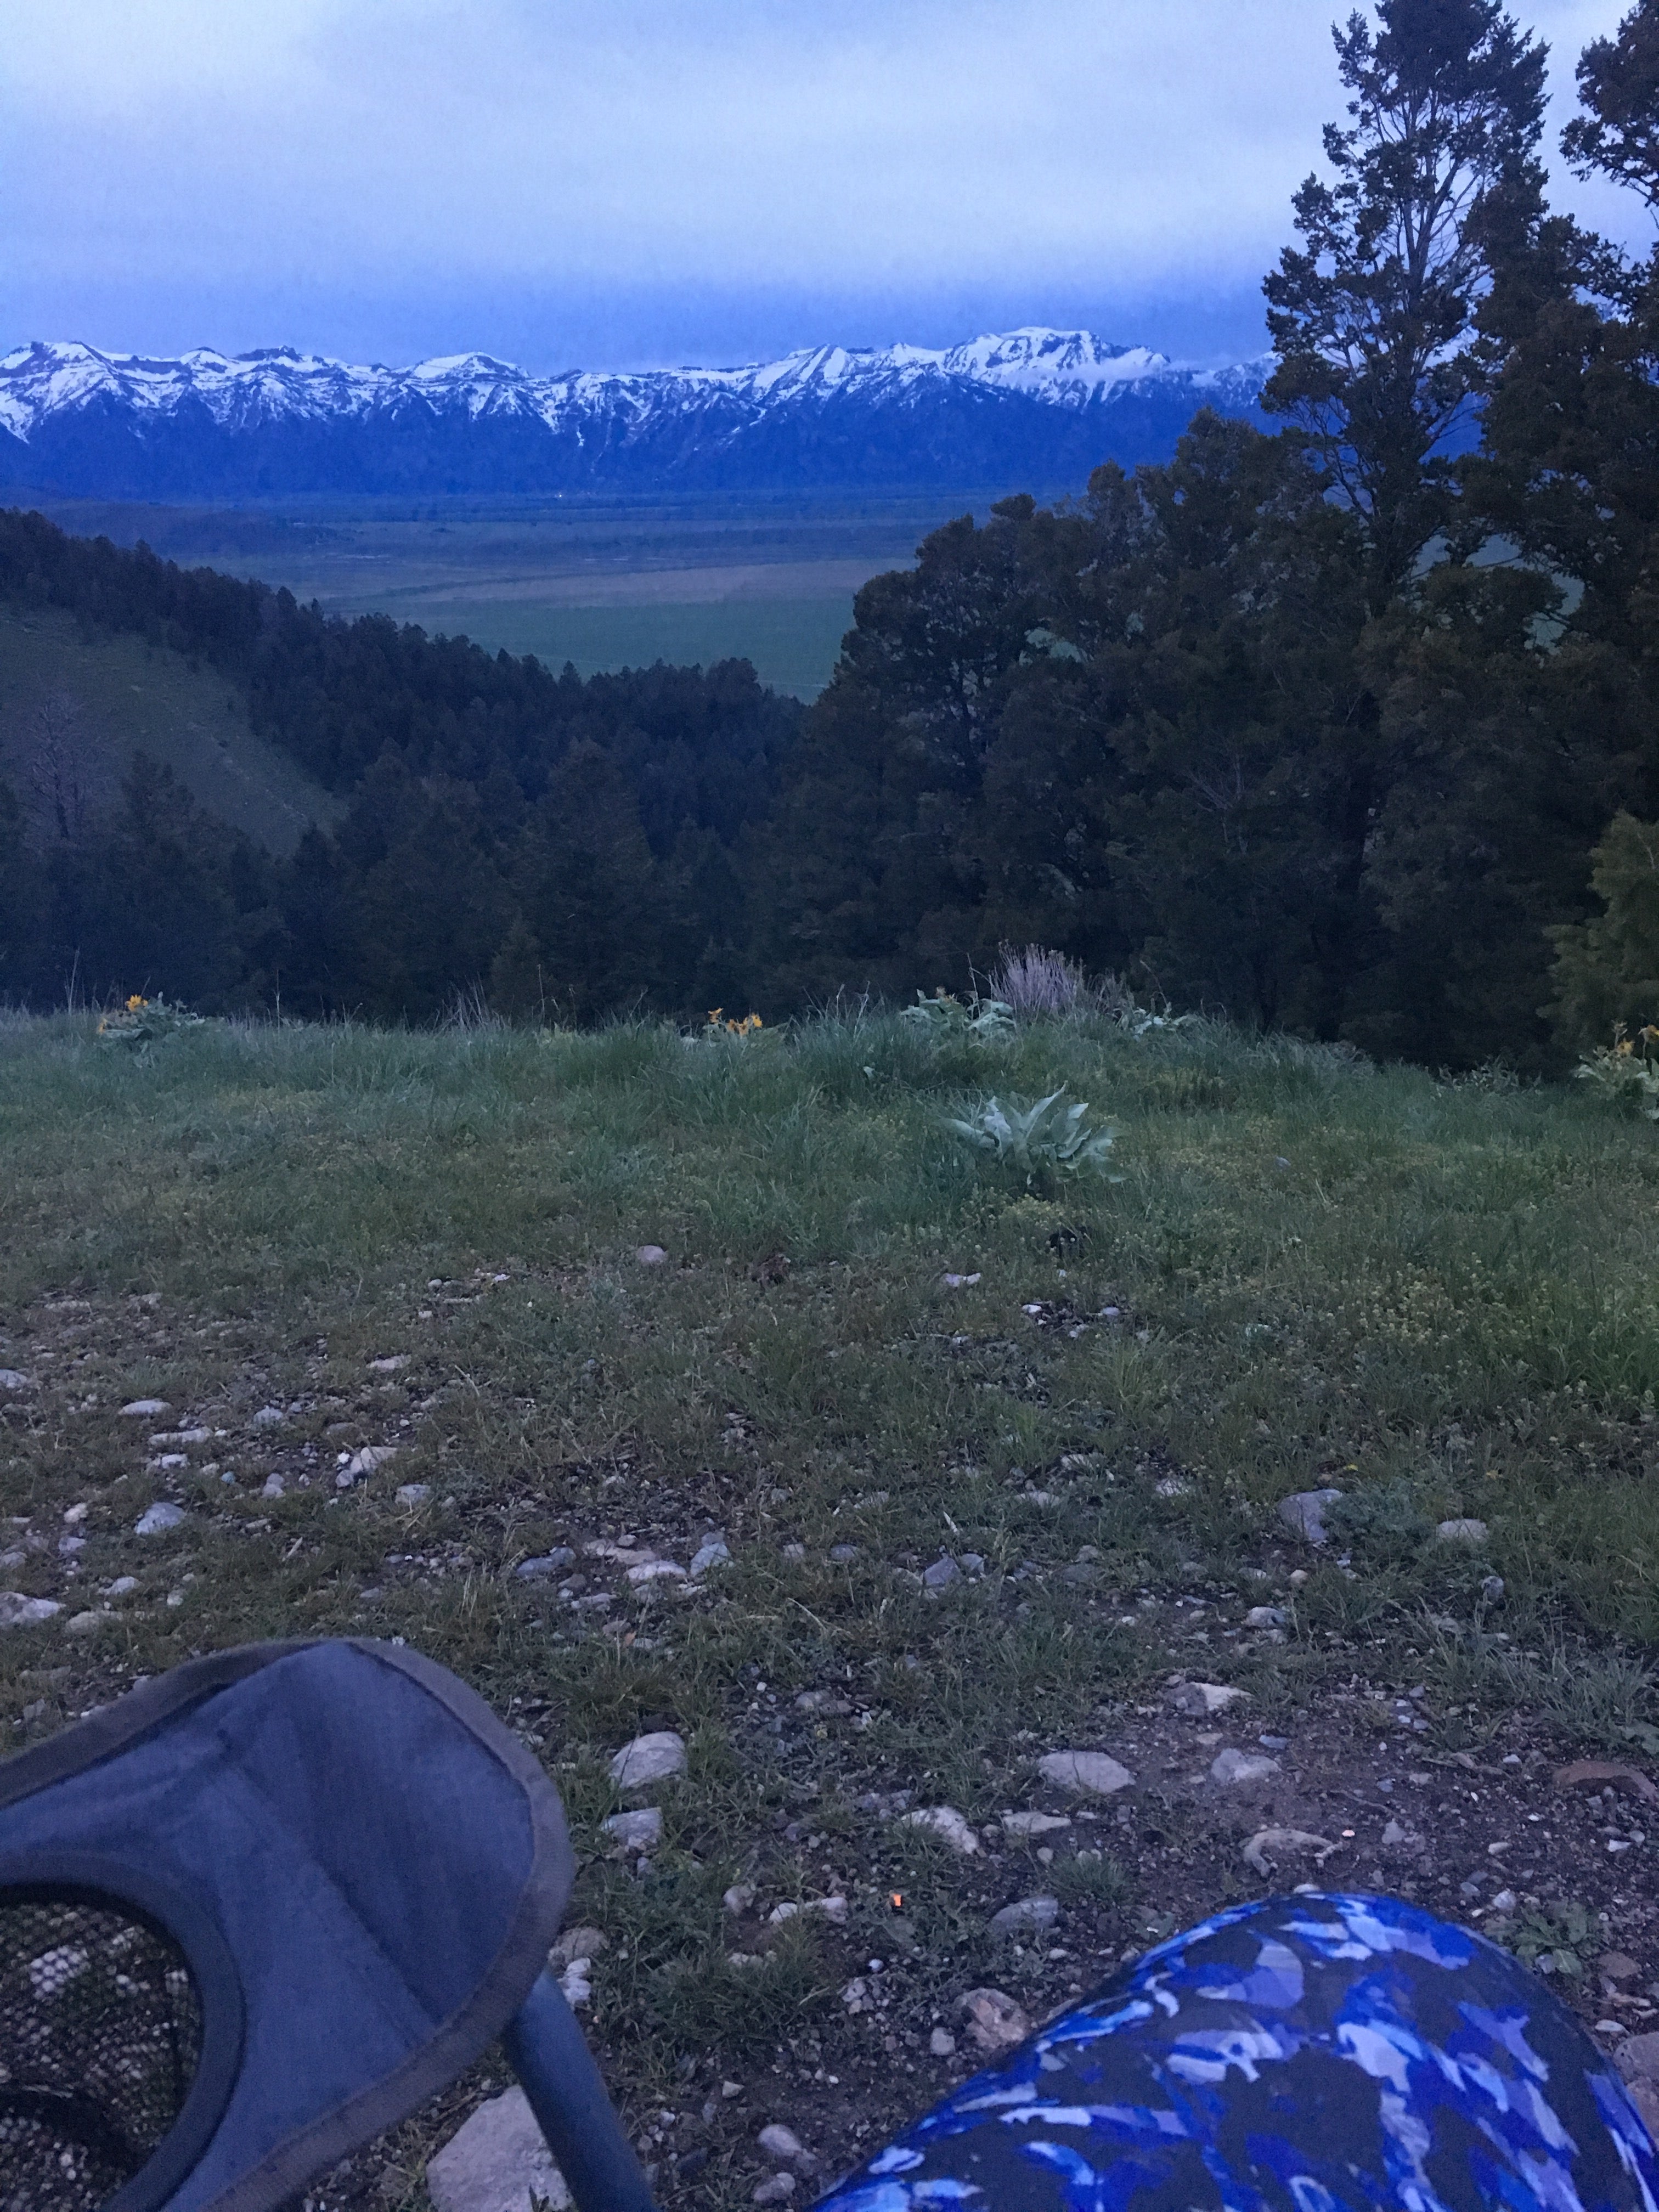 Sitting around the fire looking over the Tetons